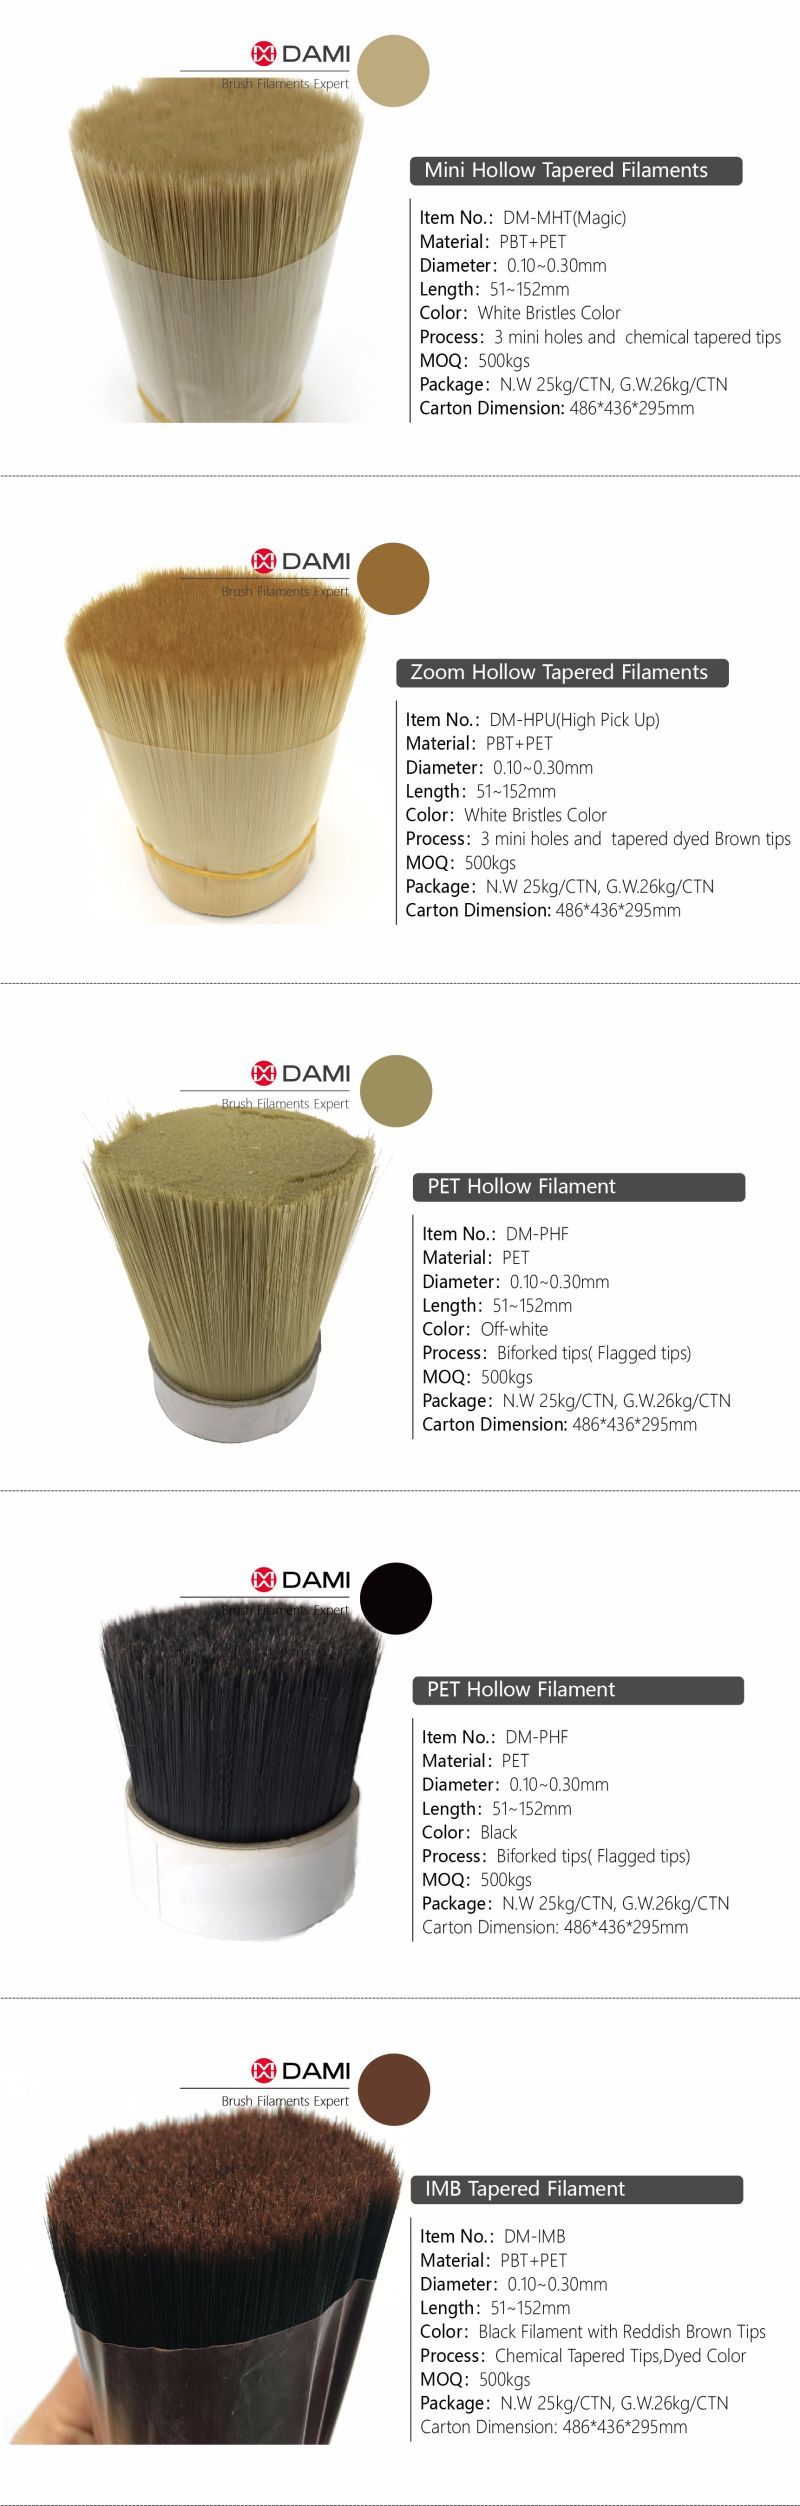 White and Brown Mixed PBT Sollid Tapered Filaments for Paint Brushes